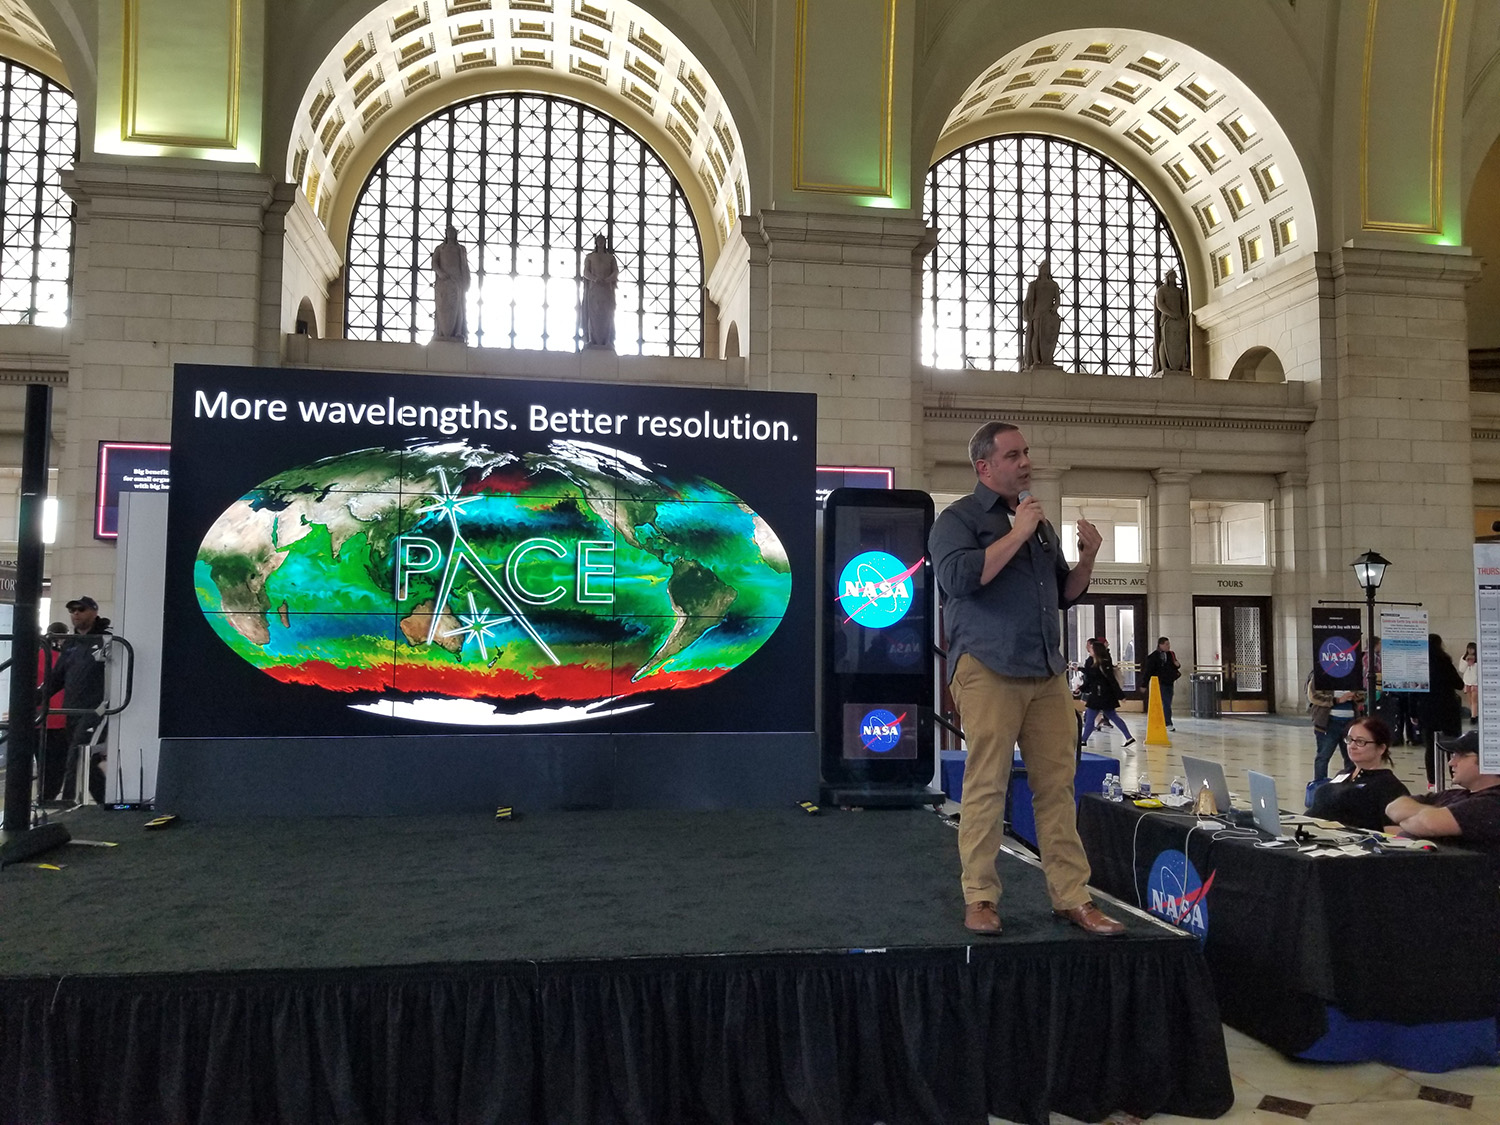 PACE Project Scientist Dr. Jeremy Werdell concludes a hyperwall talk that he presented for a public audience at the NASA Earth Day event in Washington, D.C.